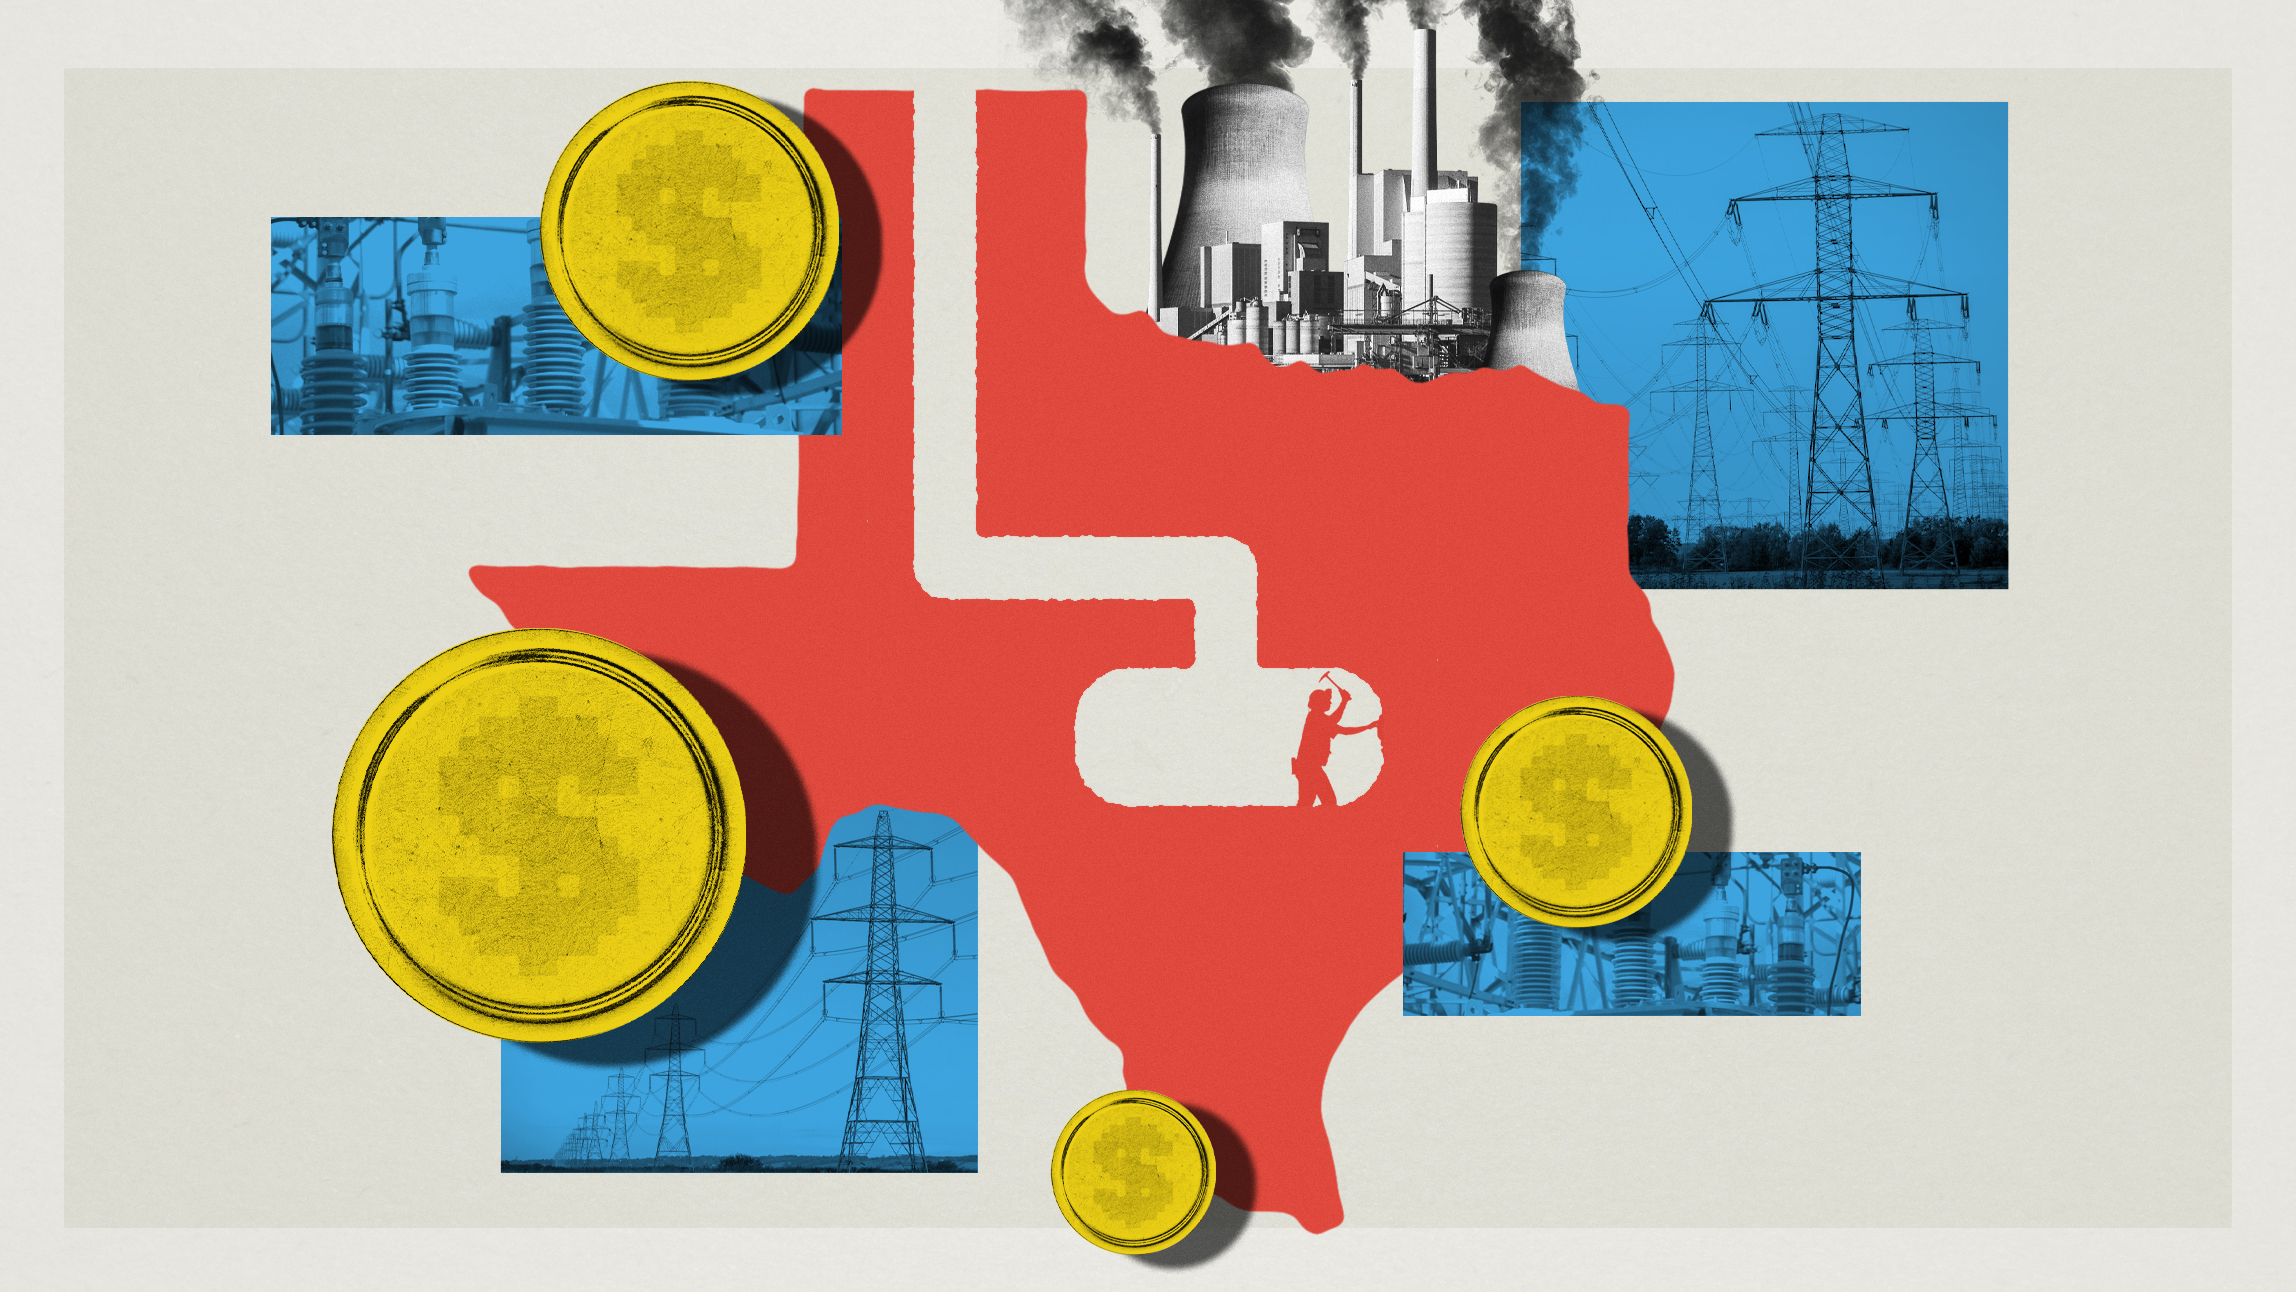 An illustrated collage of the state of Texas, Bitcoins, and power grid imagery